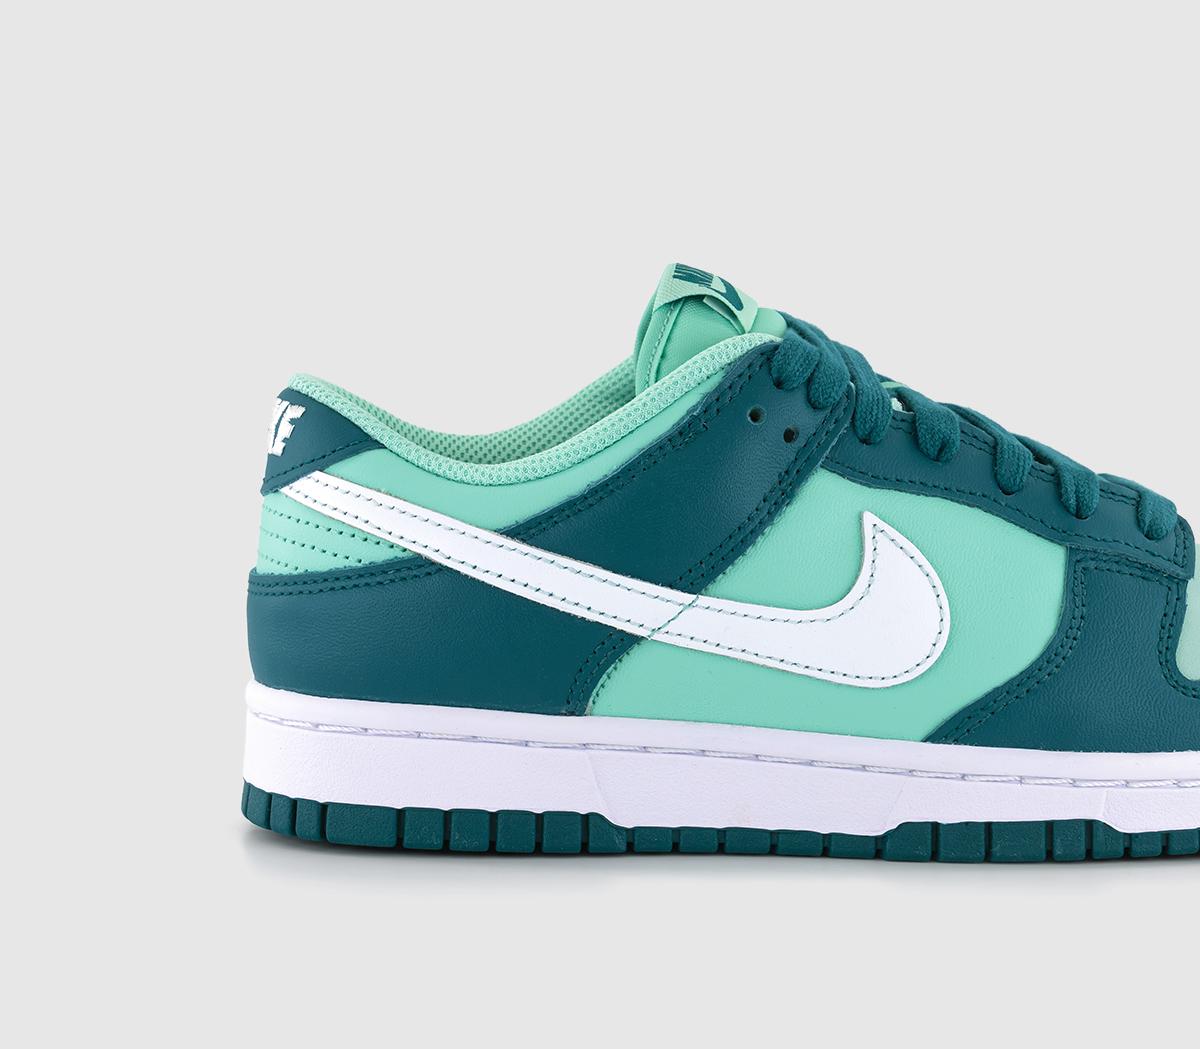 Nike Dunk Low Trainers Geode Teal White Emerald Rise - Nike Dunk